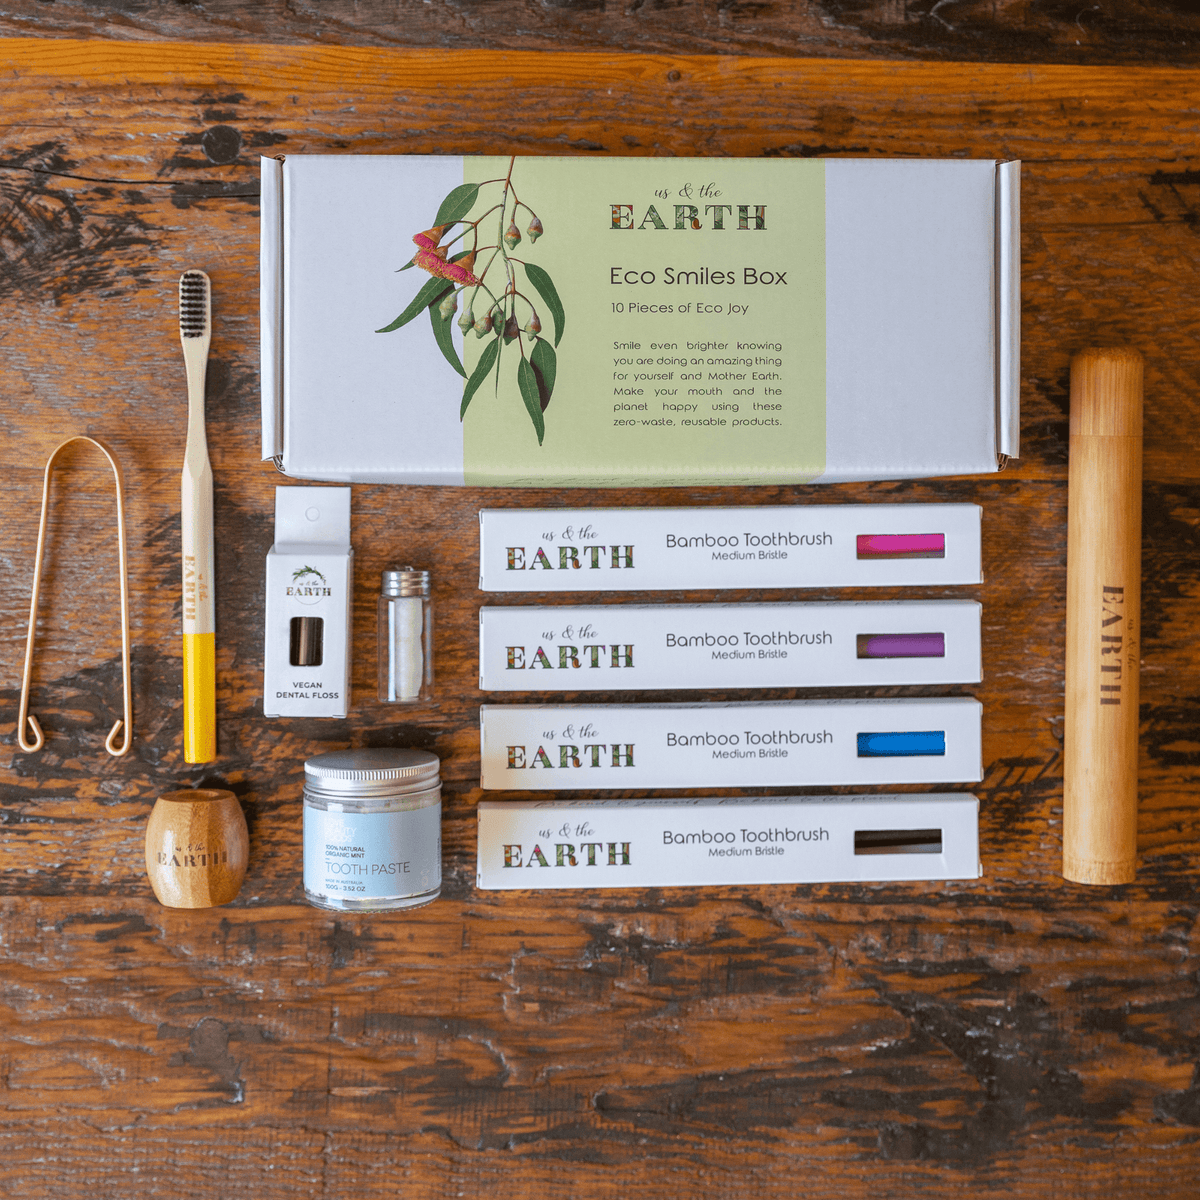 Us And The Earth - Smiles Box Chemical Free Tooth Care